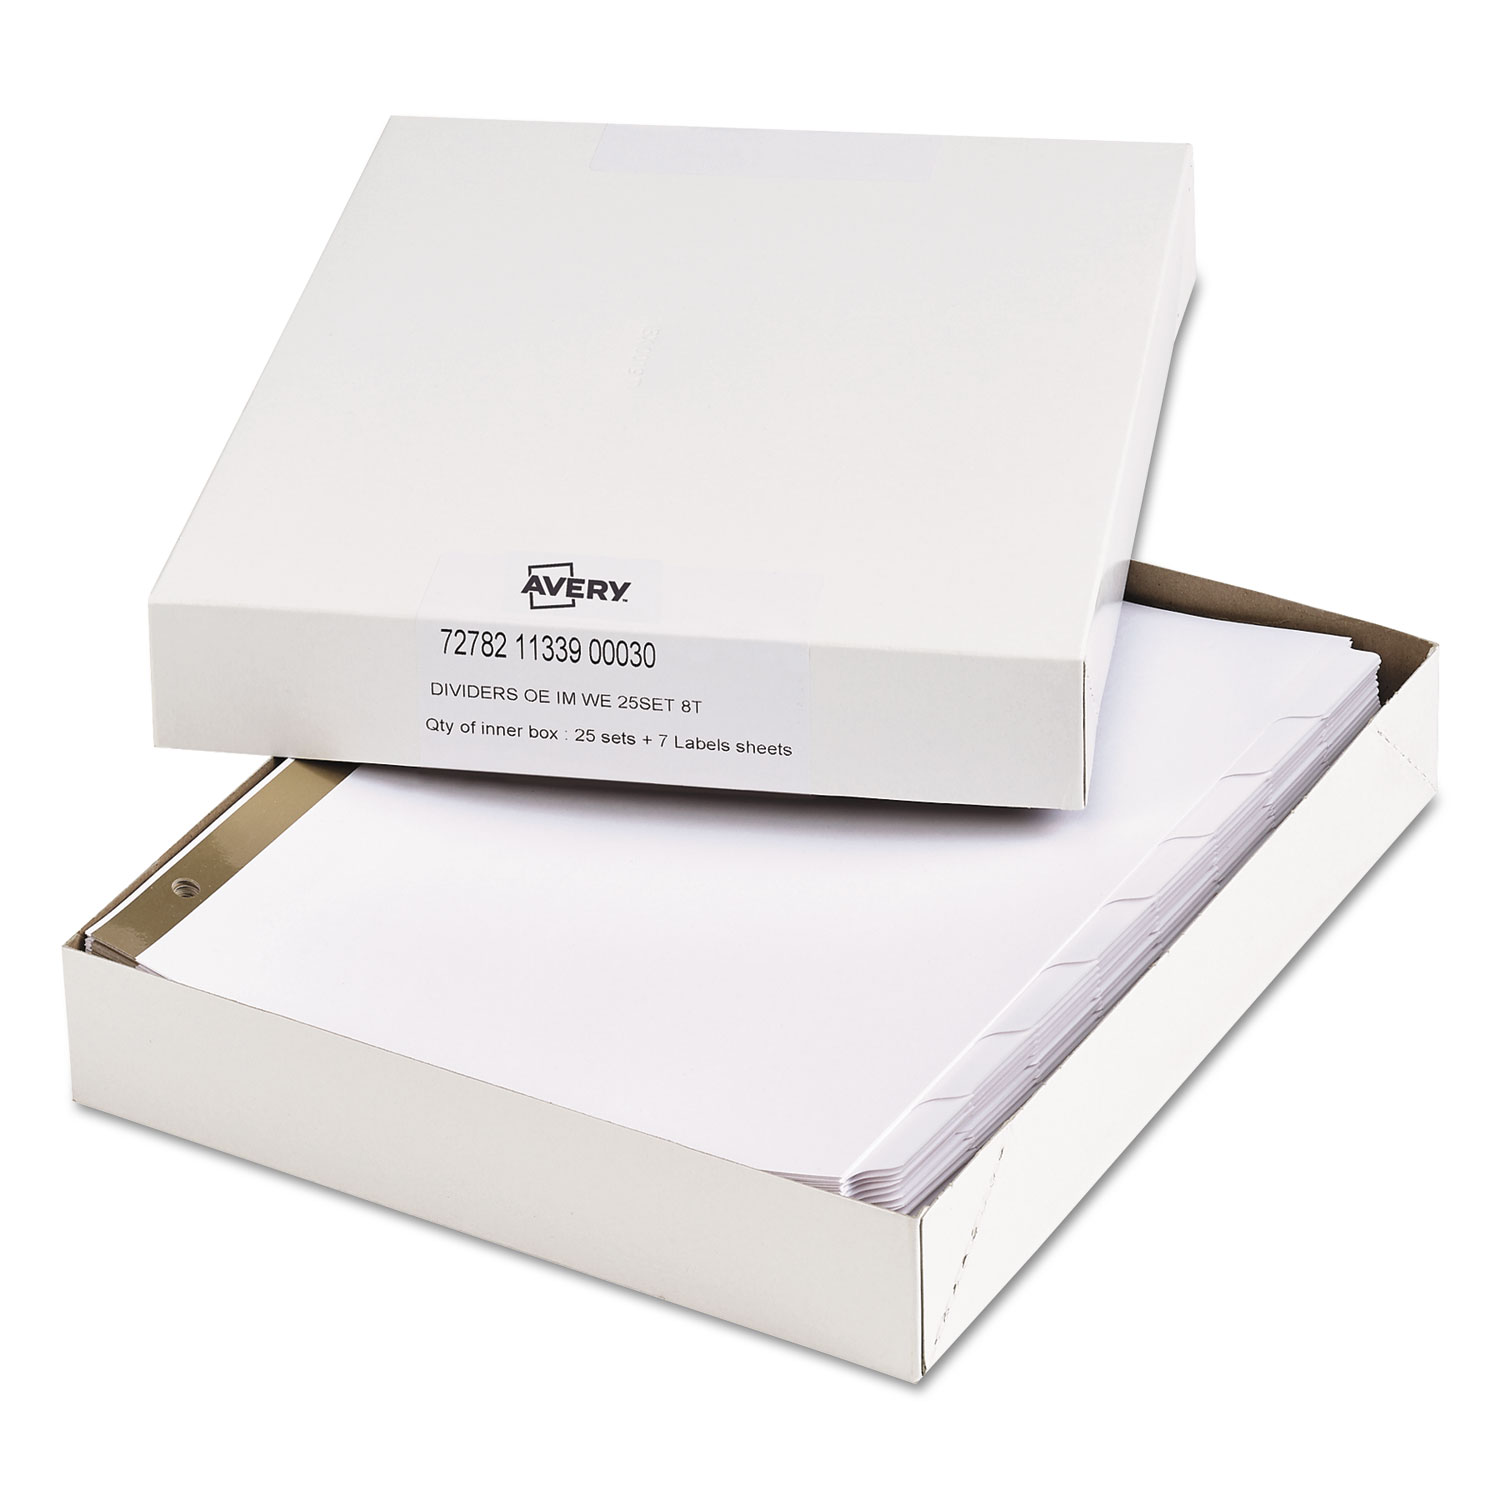  Office Essentials 11339 Index Dividers with White Labels, 8-Tab, 11.5 x 9.75, White, 25 Sets (AVE11339) 